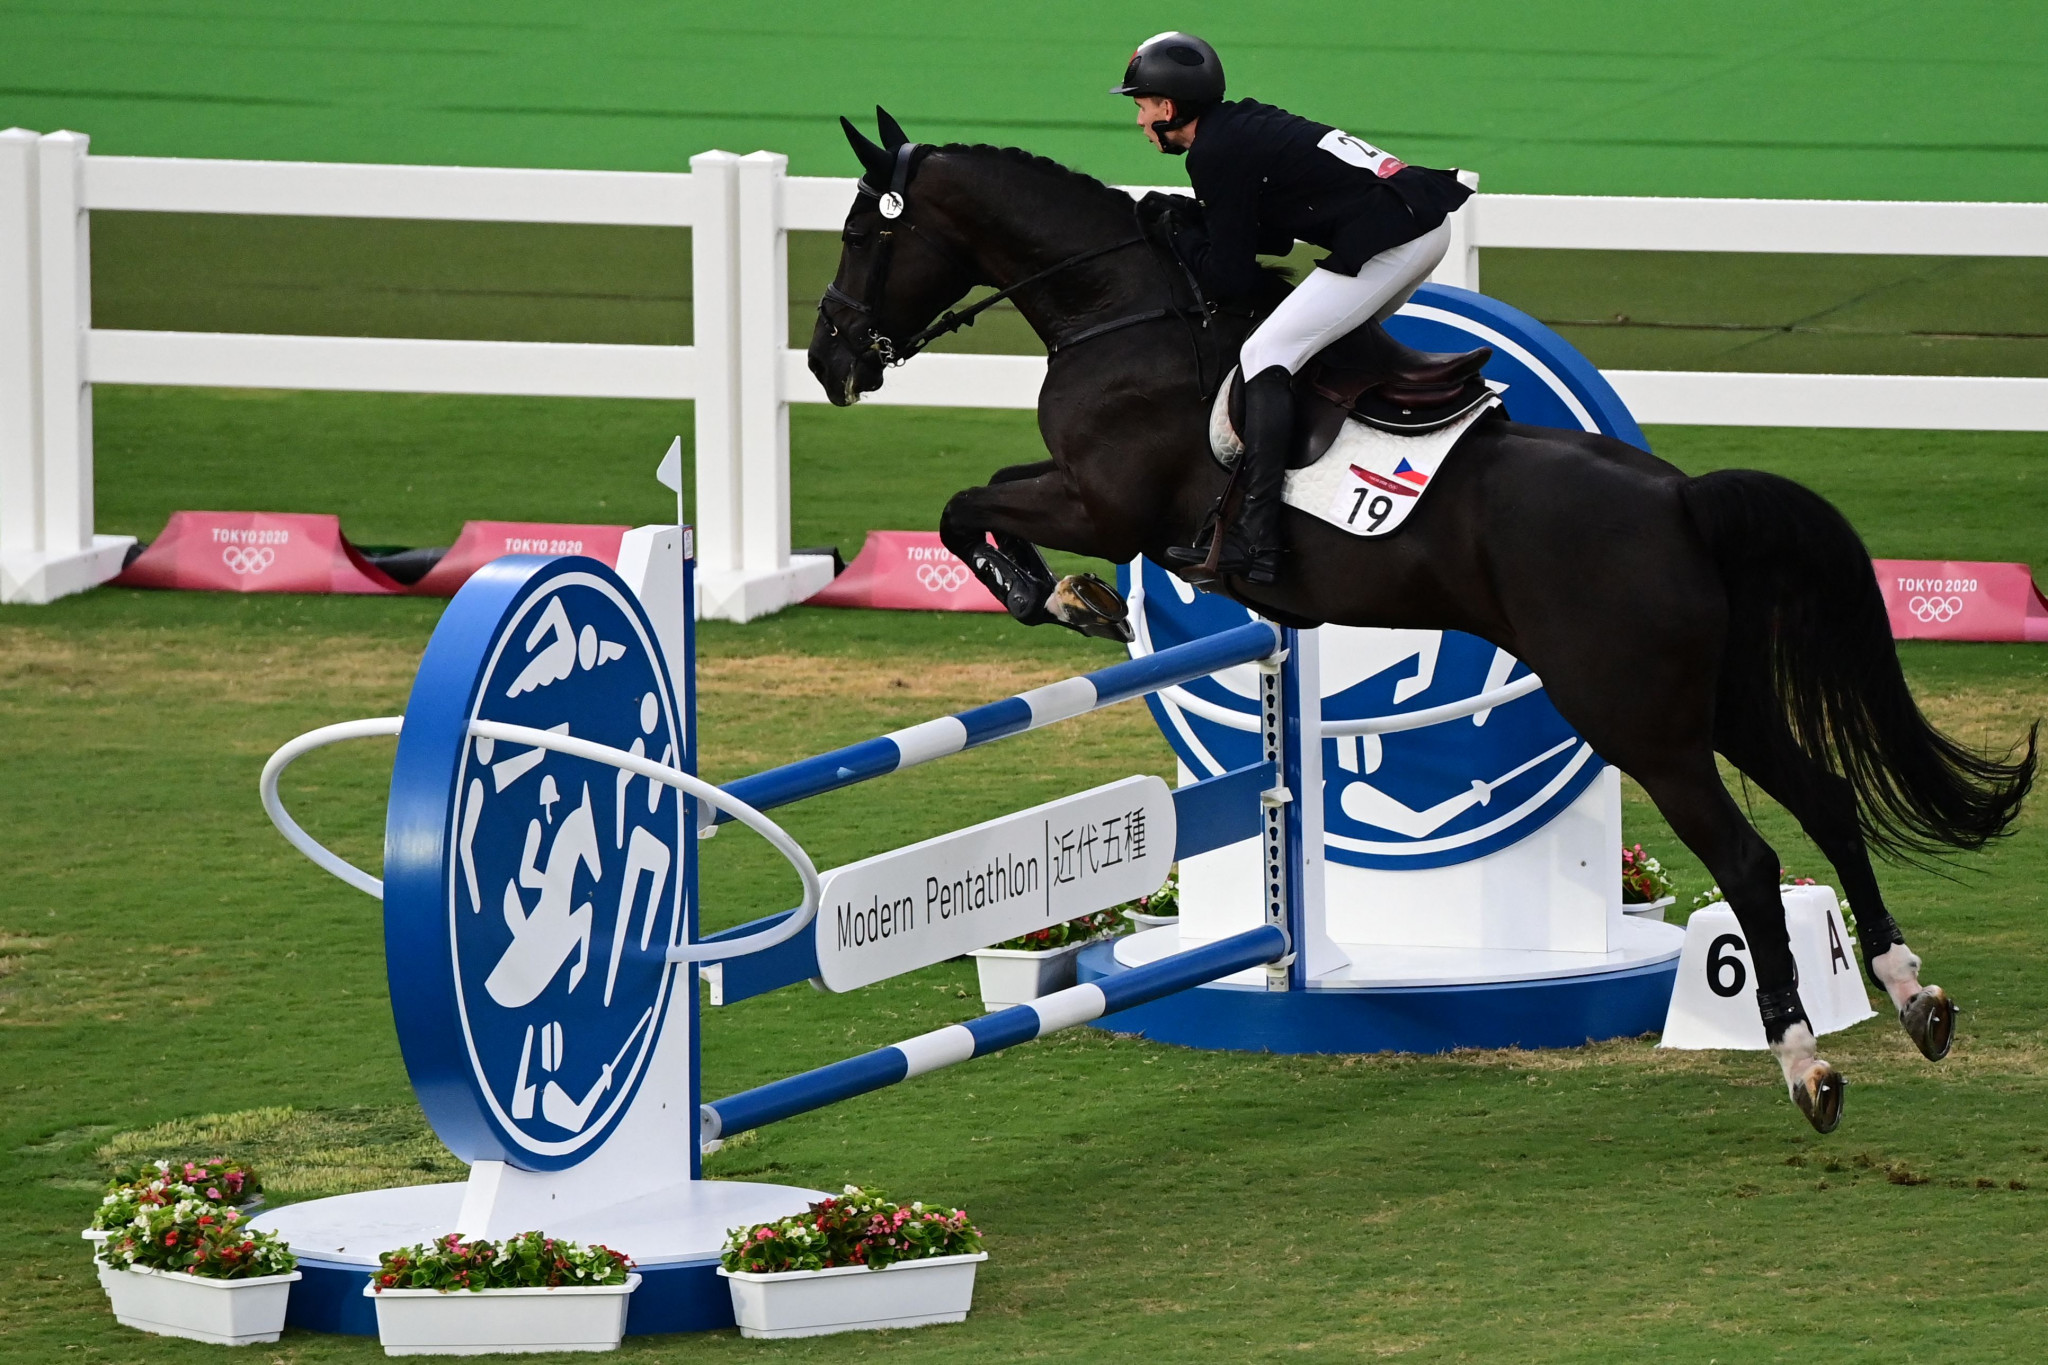 The International Modern Pentathlon Union has announced that an obstacle discipline is set to be tested as a possible replacement to riding, dropped following the Tokyo 2020 Olympics ©Getty Images